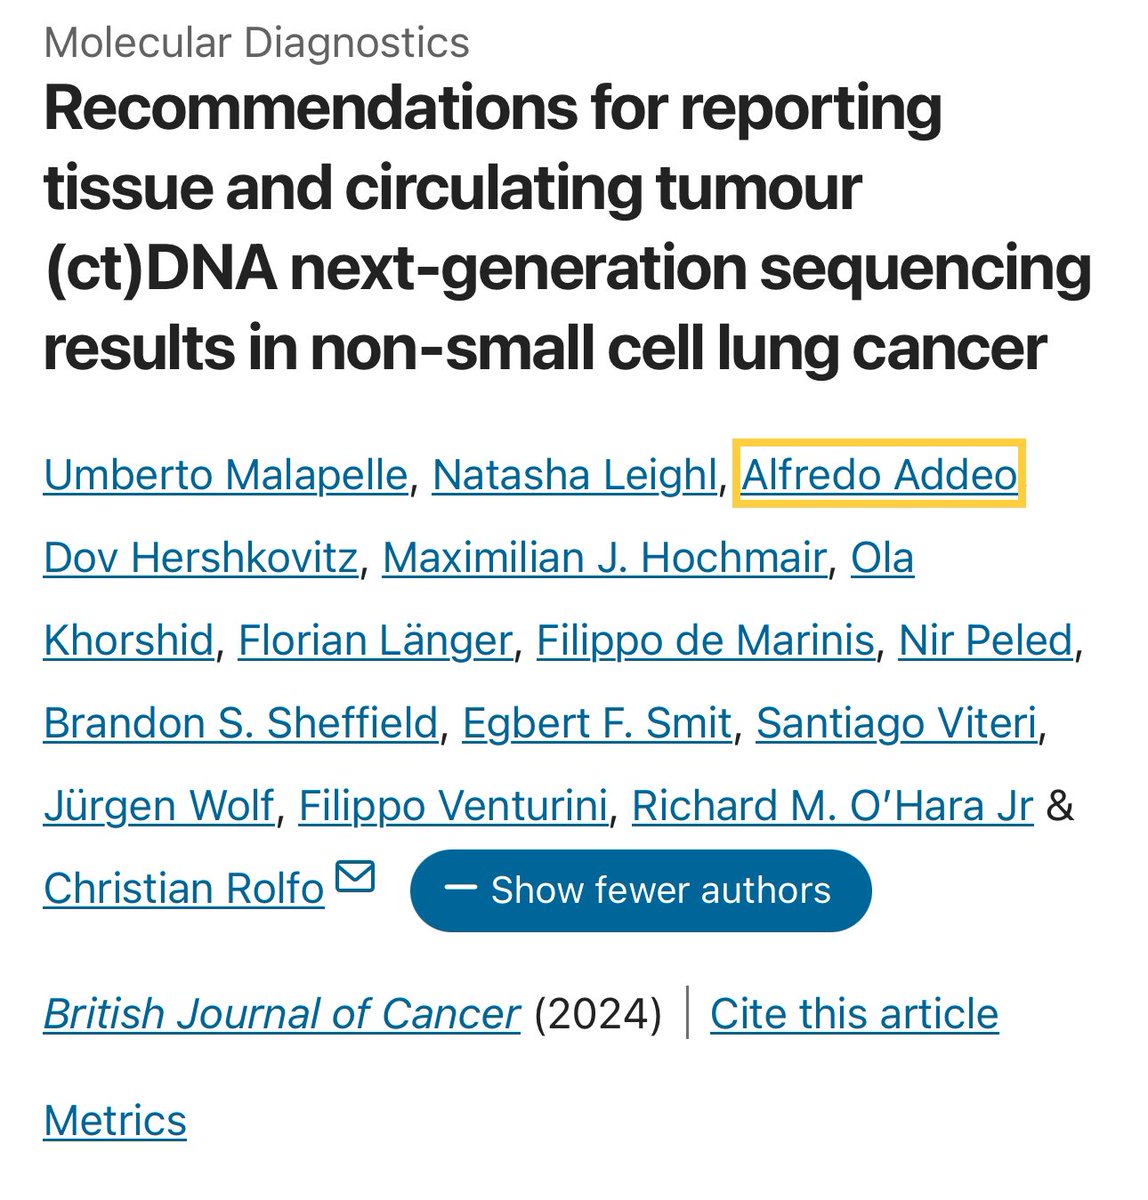 Next-generation sequencing is key for managing NSCLC, enabling comprehensive molecular profiling for targeted therapies. Best practice recommendations for reporting ensure clear, actionable results. #LungCancer #NGS #Oncology #PrecisionMedicine @UmbertoMalapel1 @ChristianRolfo